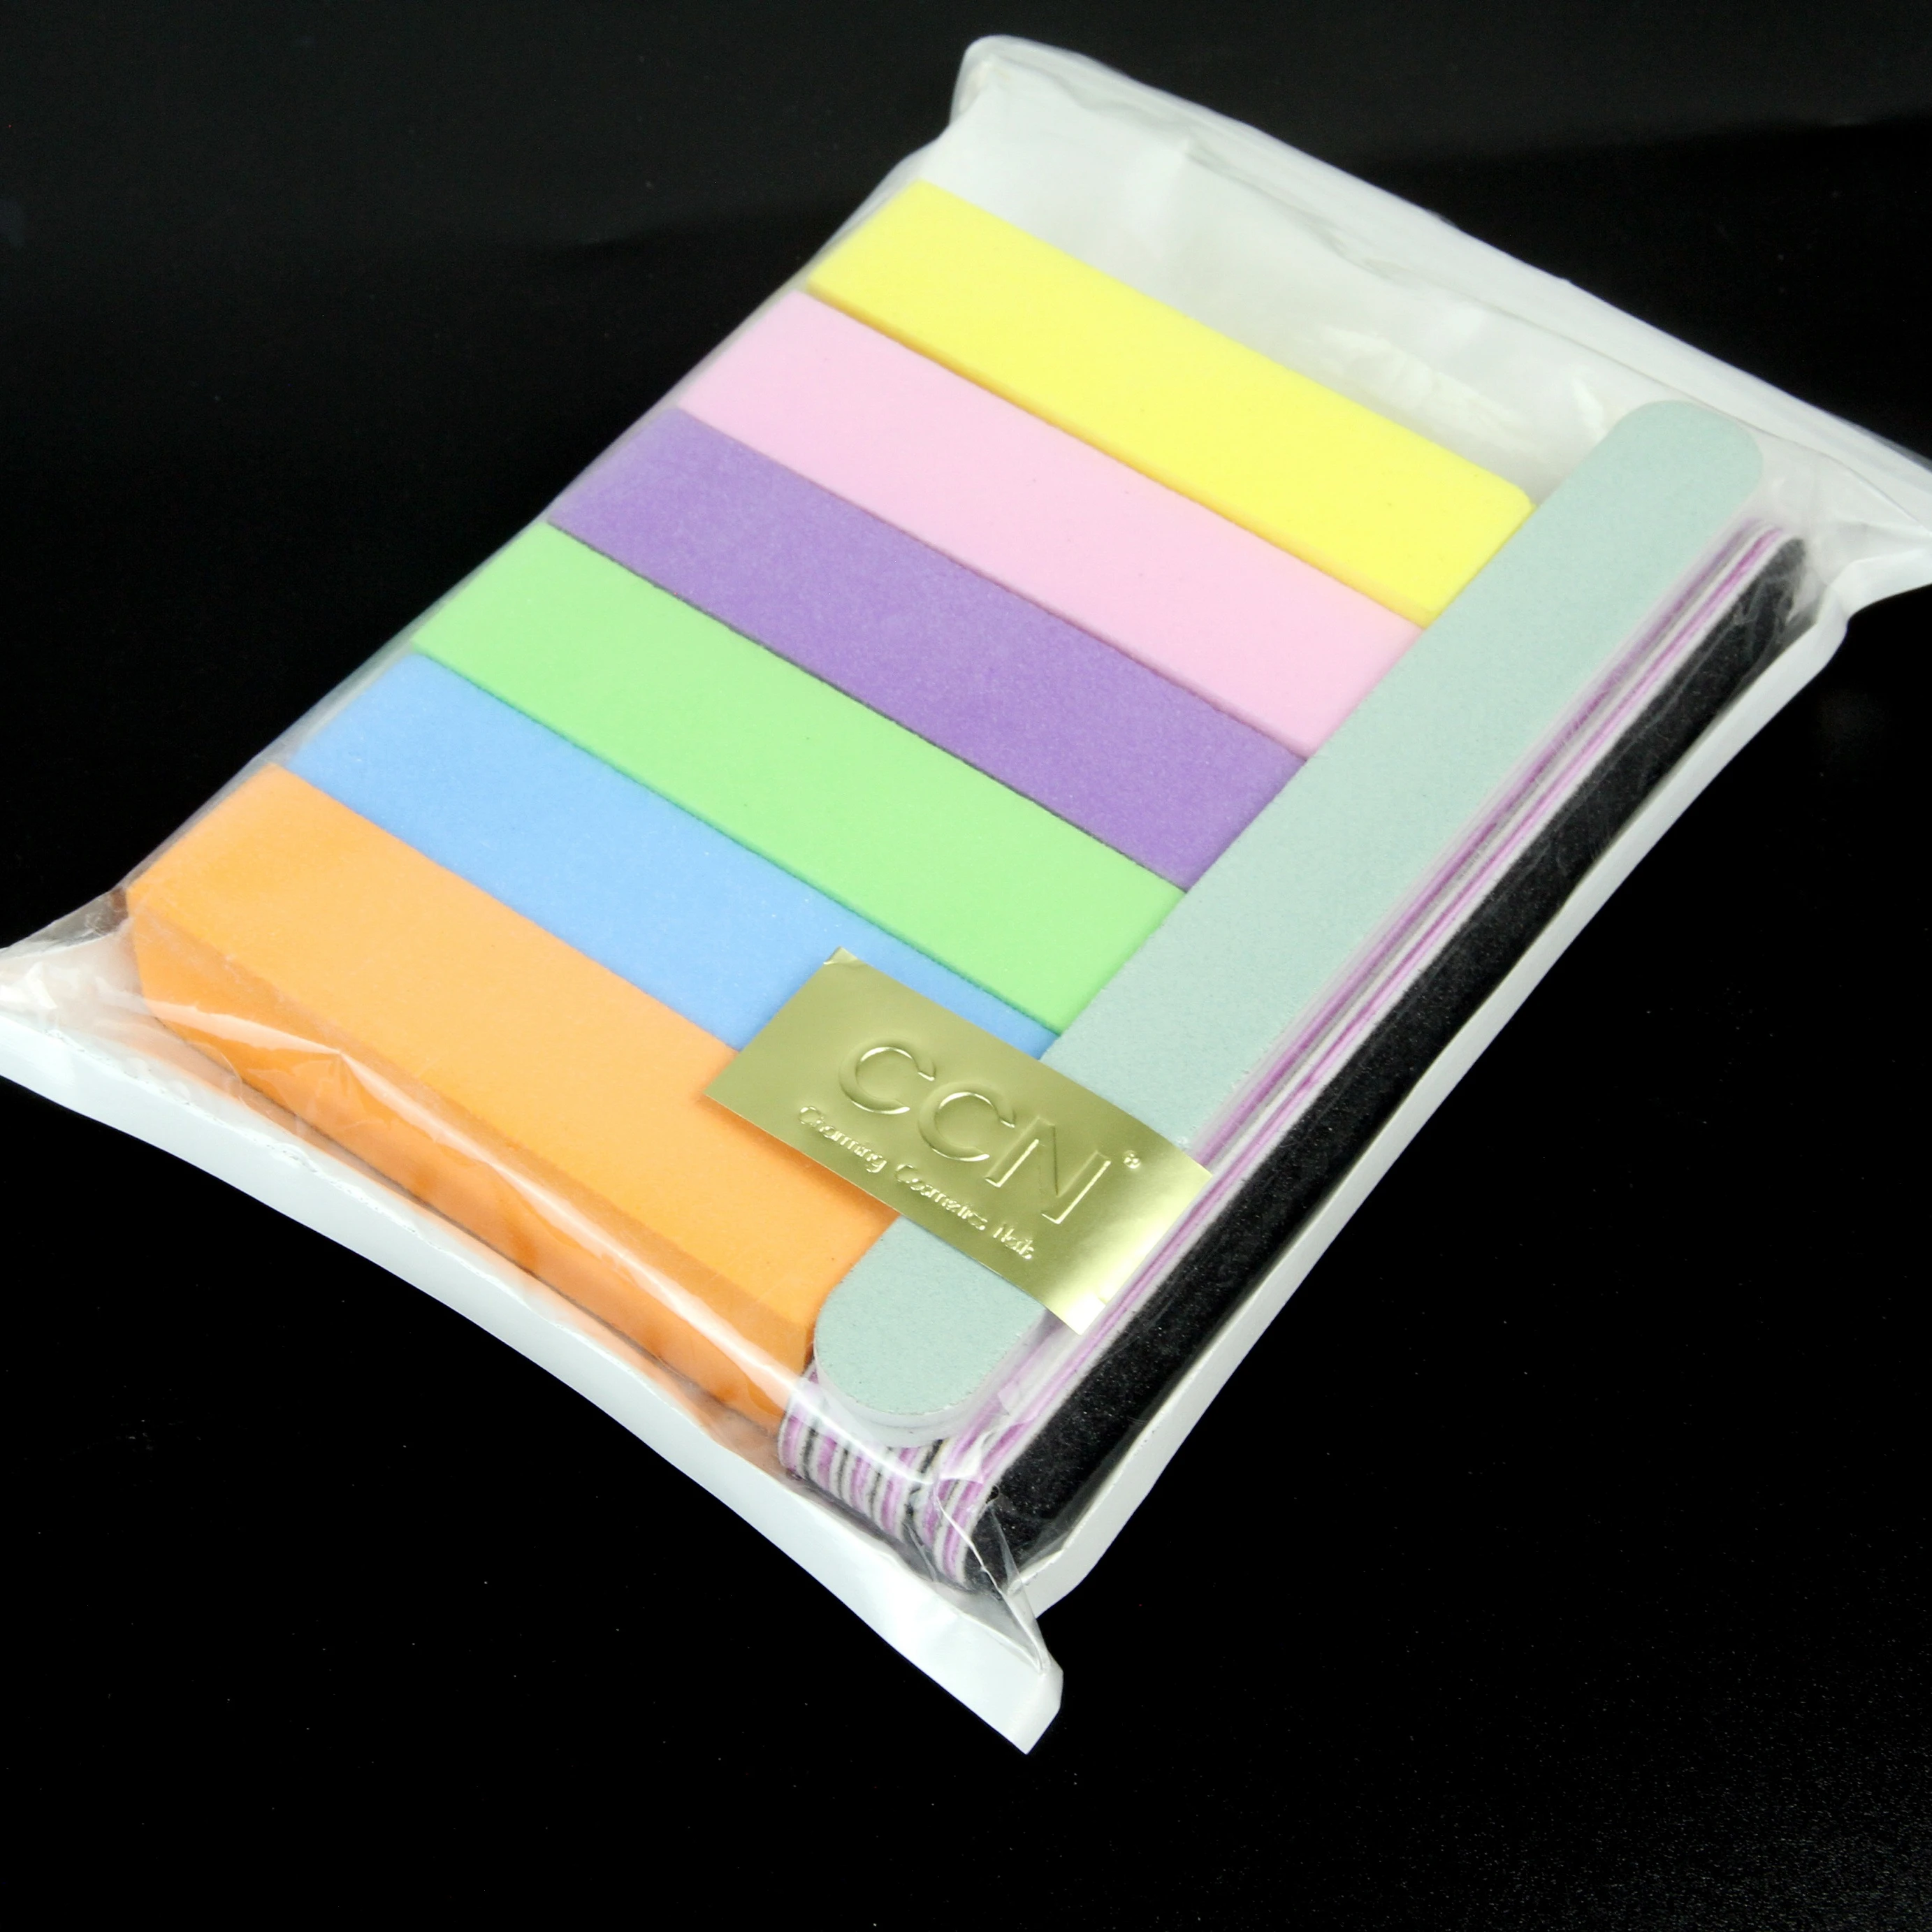 

Ready To Ship 100/180 Grit Doublesided Emery Board Professional Manicure Tools Set Nail File and Buffer Set, Orange,green,purple,yellow,blue,pink